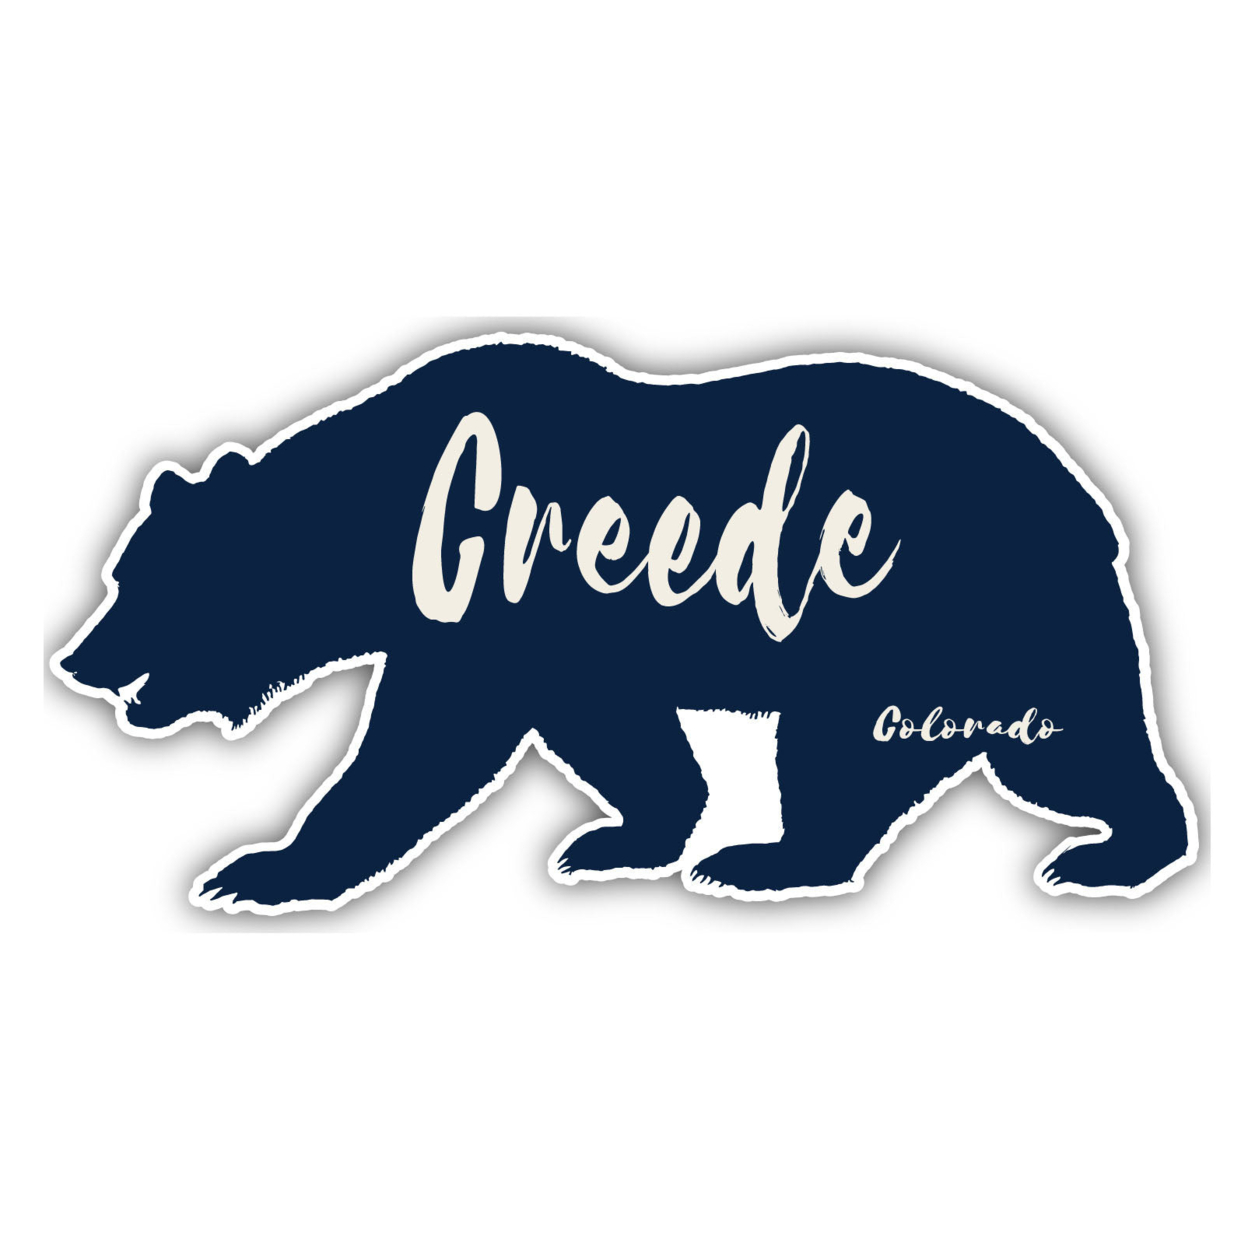 Creede Colorado Souvenir Decorative Stickers (Choose Theme And Size) - 4-Pack, 10-Inch, Camp Life